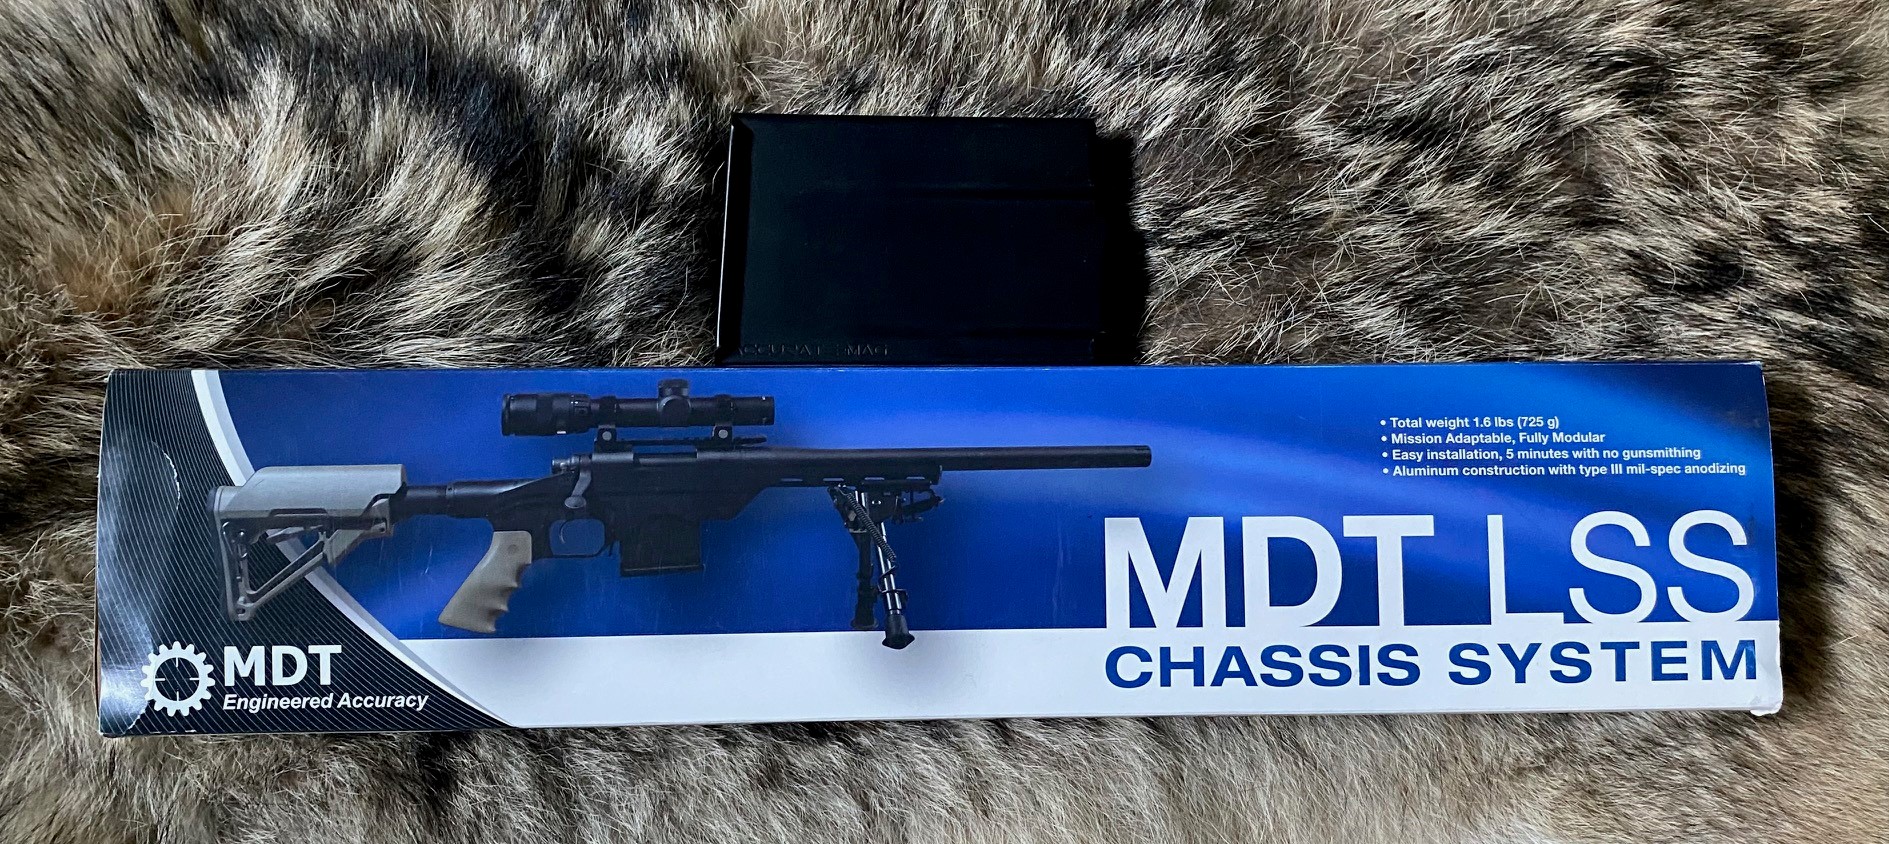 MDT LSS Chassis System - TIKKA T3 Lefthand w/ 1 Accurate Mag